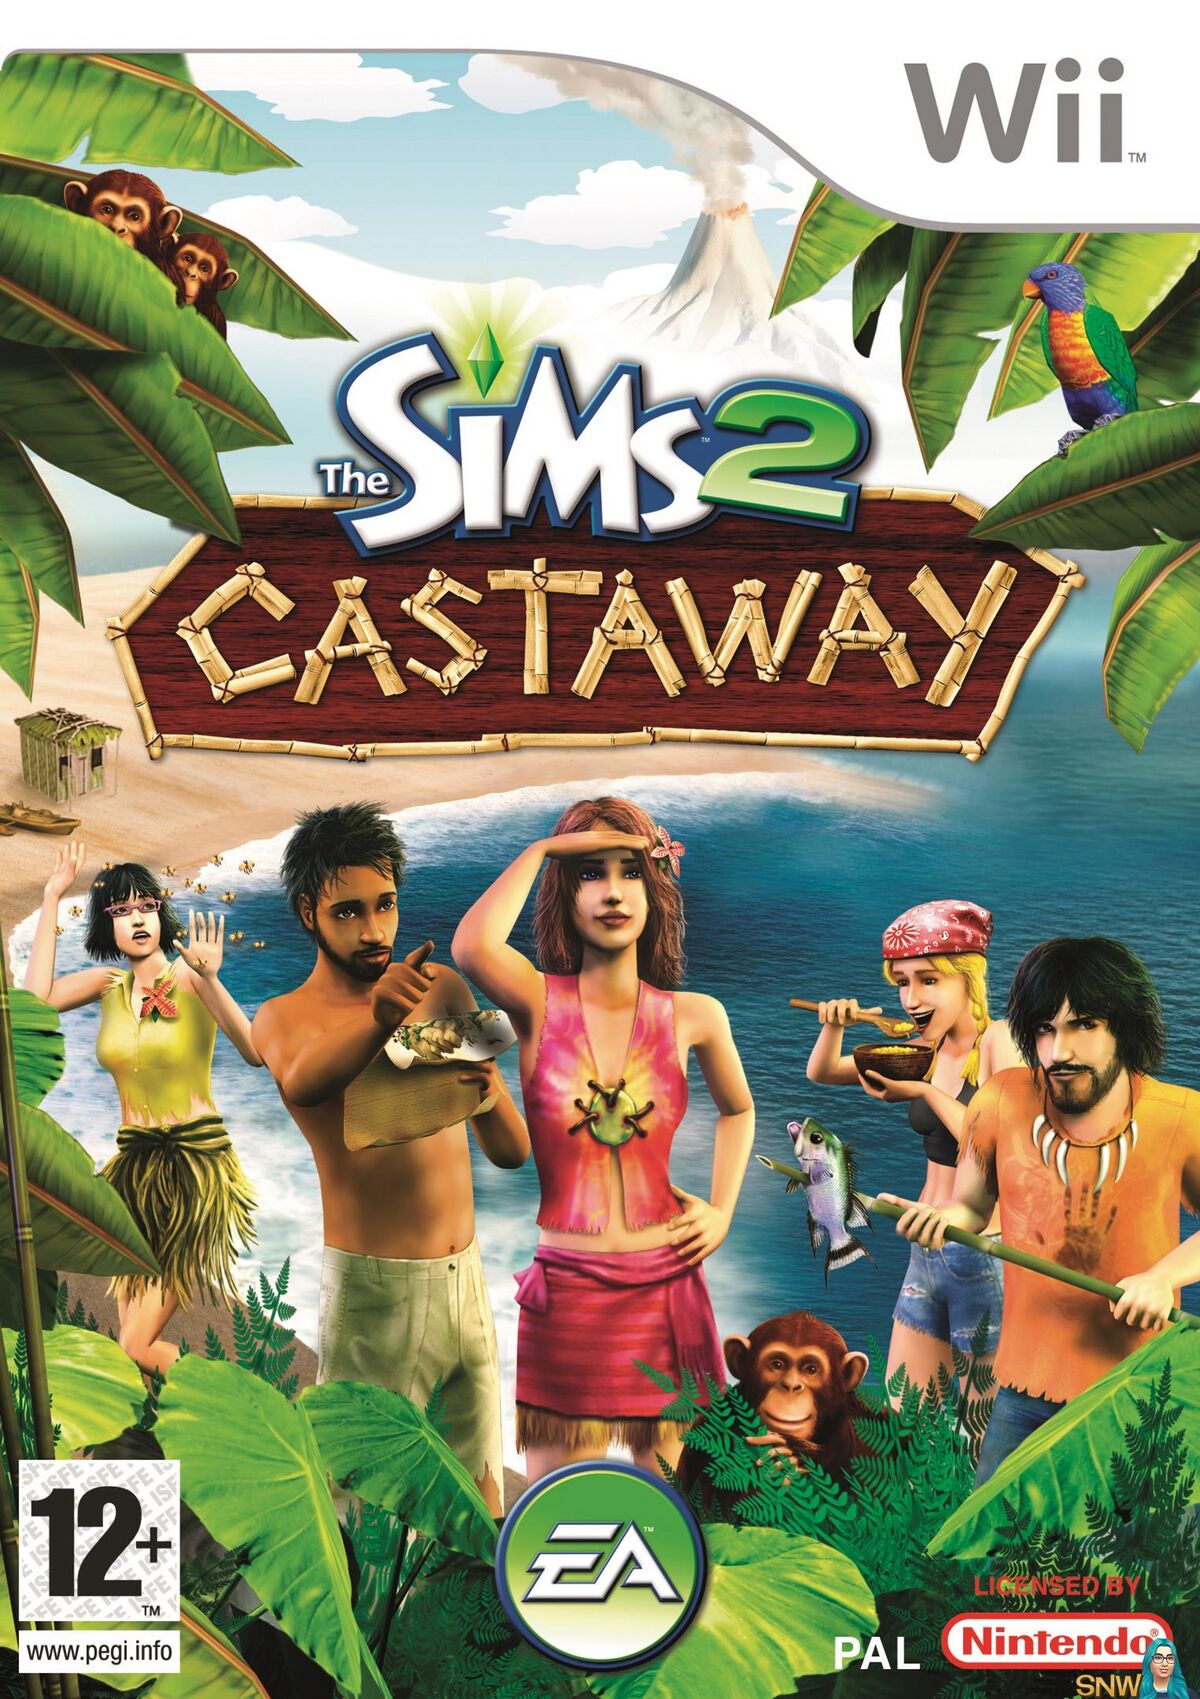 the-sims-2-castaway-strategywiki-video-game-walkthrough-strategy-guide-wiki